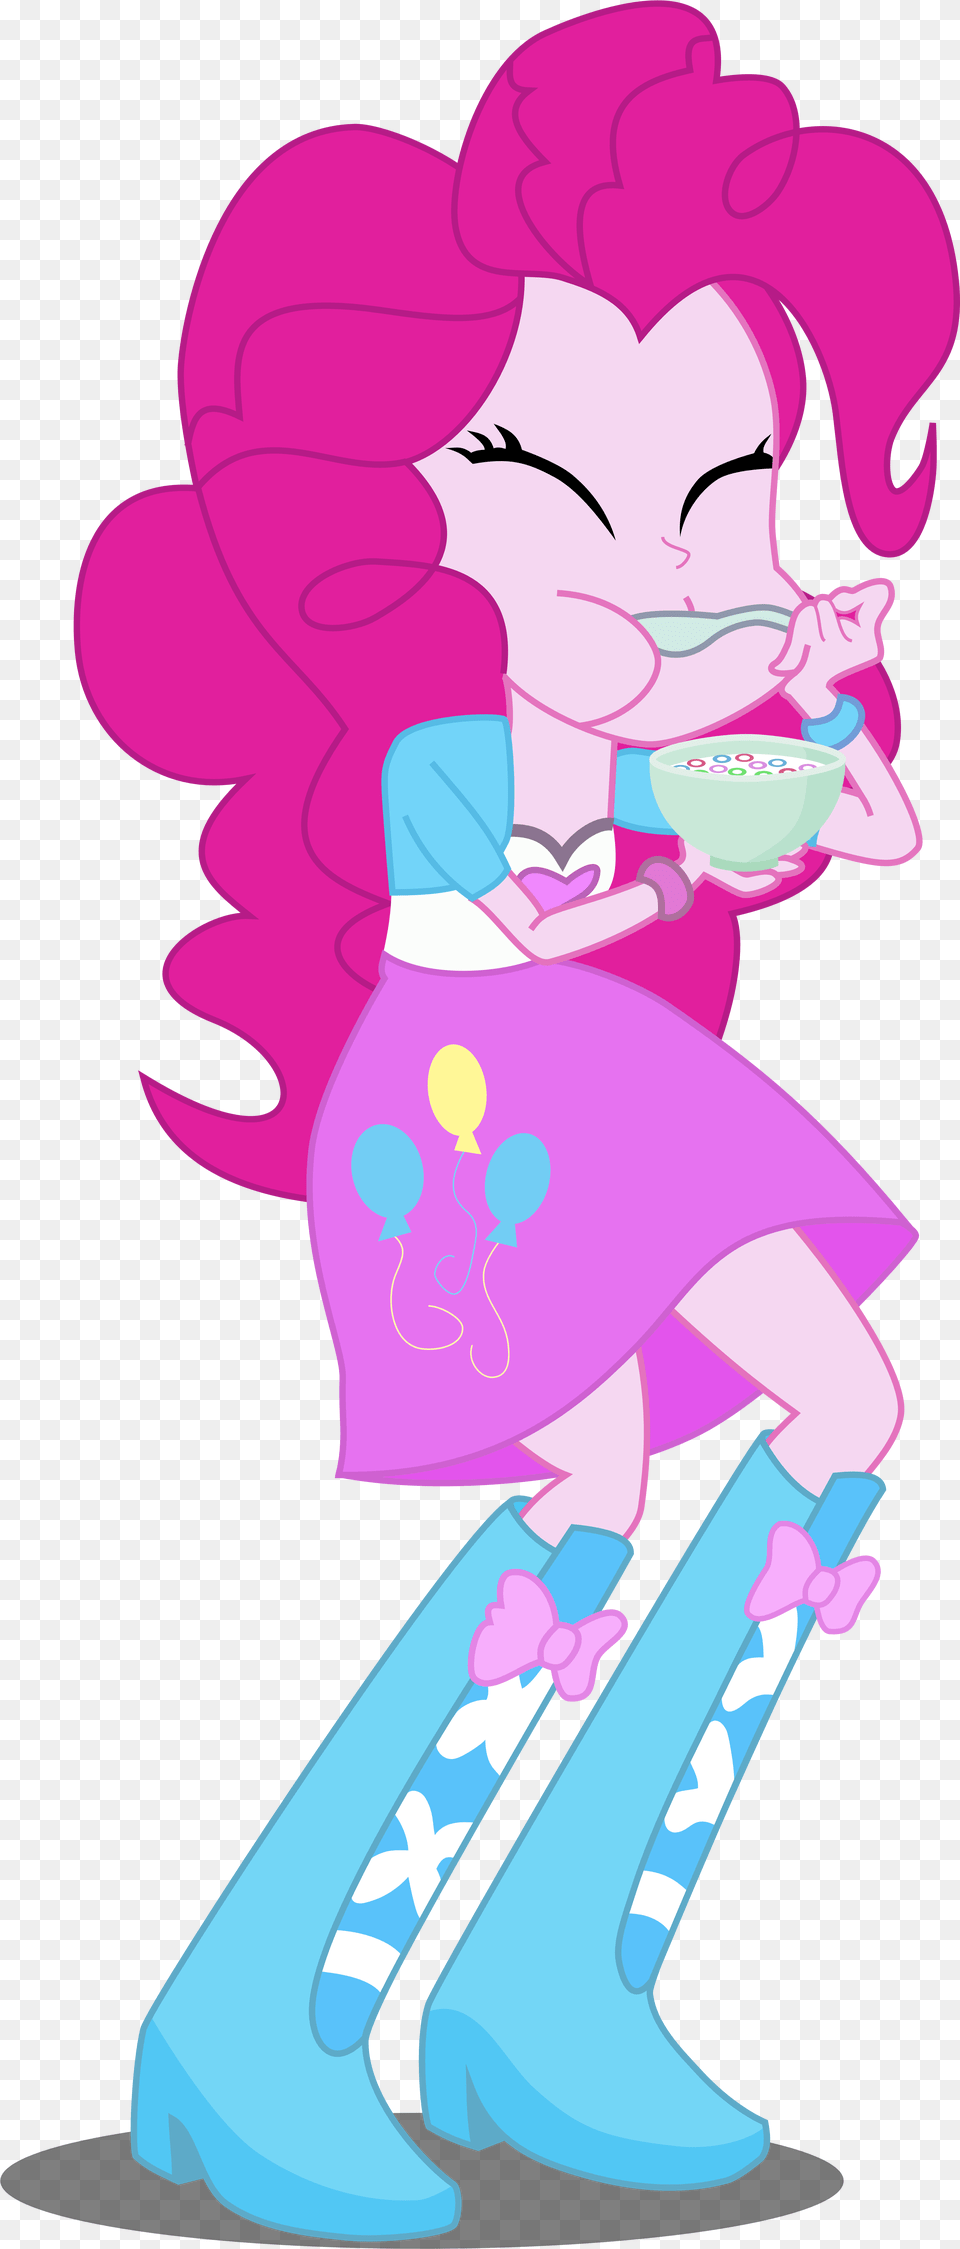 Pinkie Pie Breakfast Cereal Pink Mammal Fictional Character Pinkie Pie Cereal, Art, Graphics, Purple, Baby Free Transparent Png